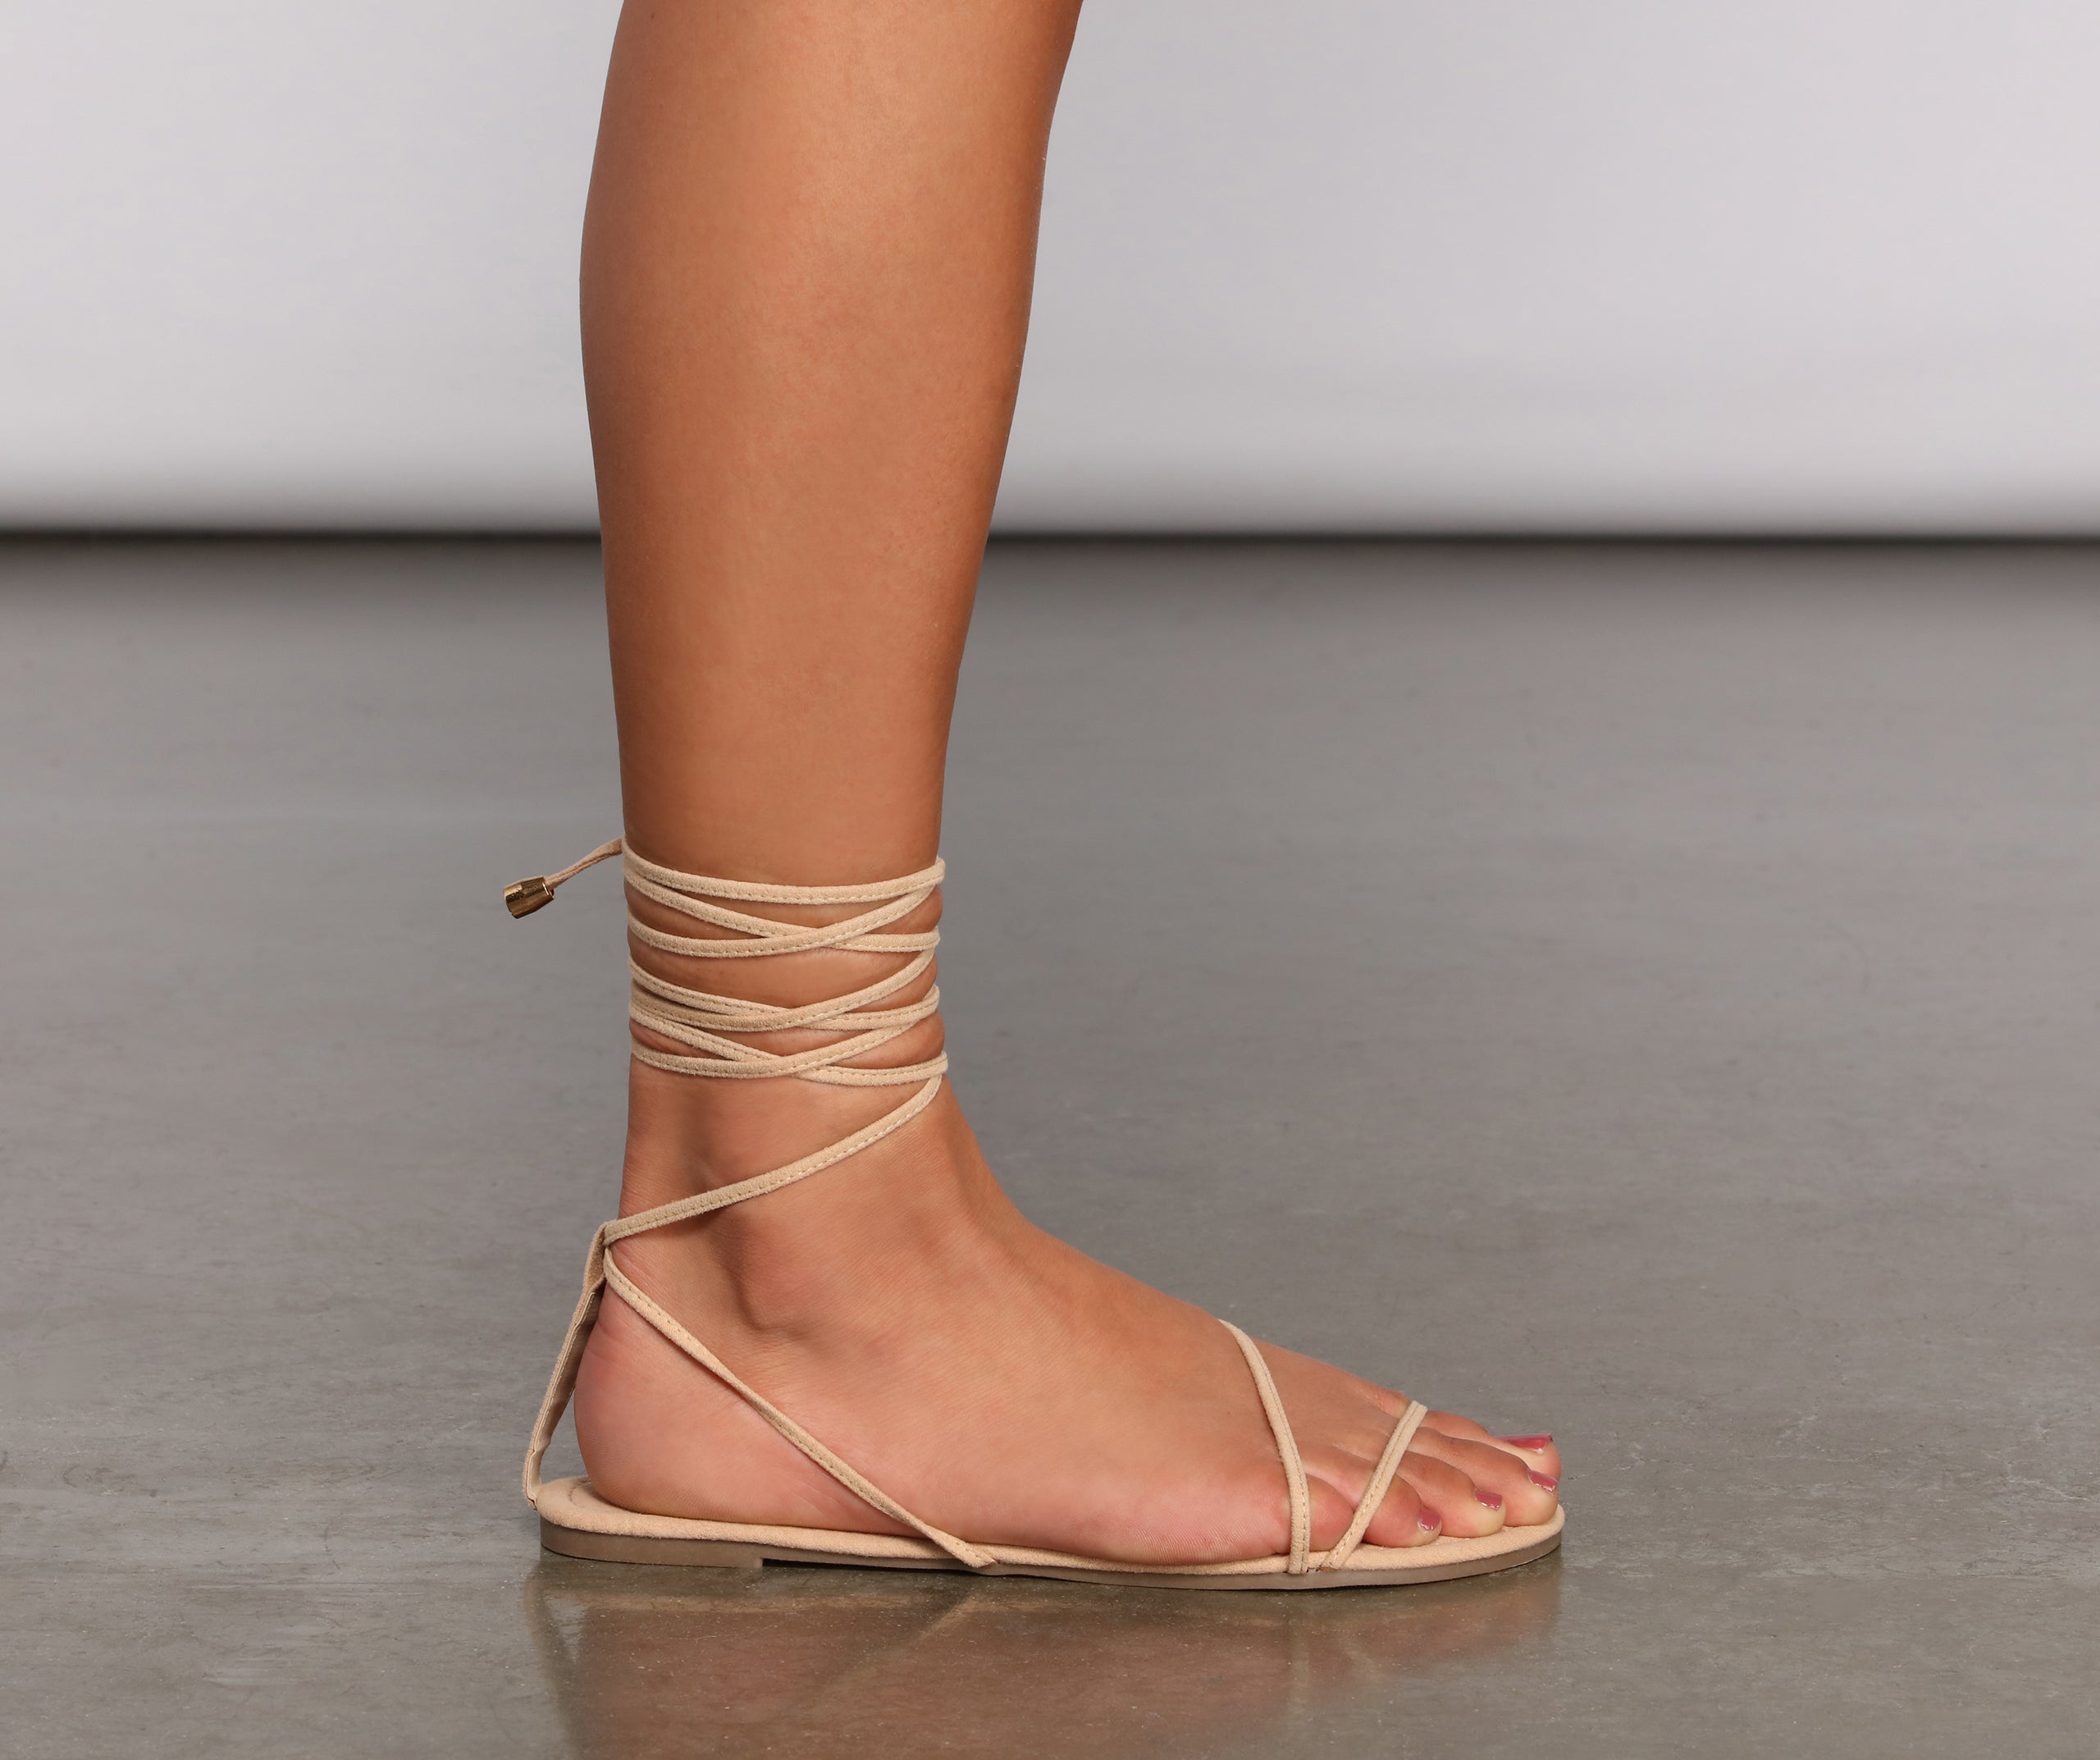 Strappy And Stylish Lace-Up Sandals Newgew